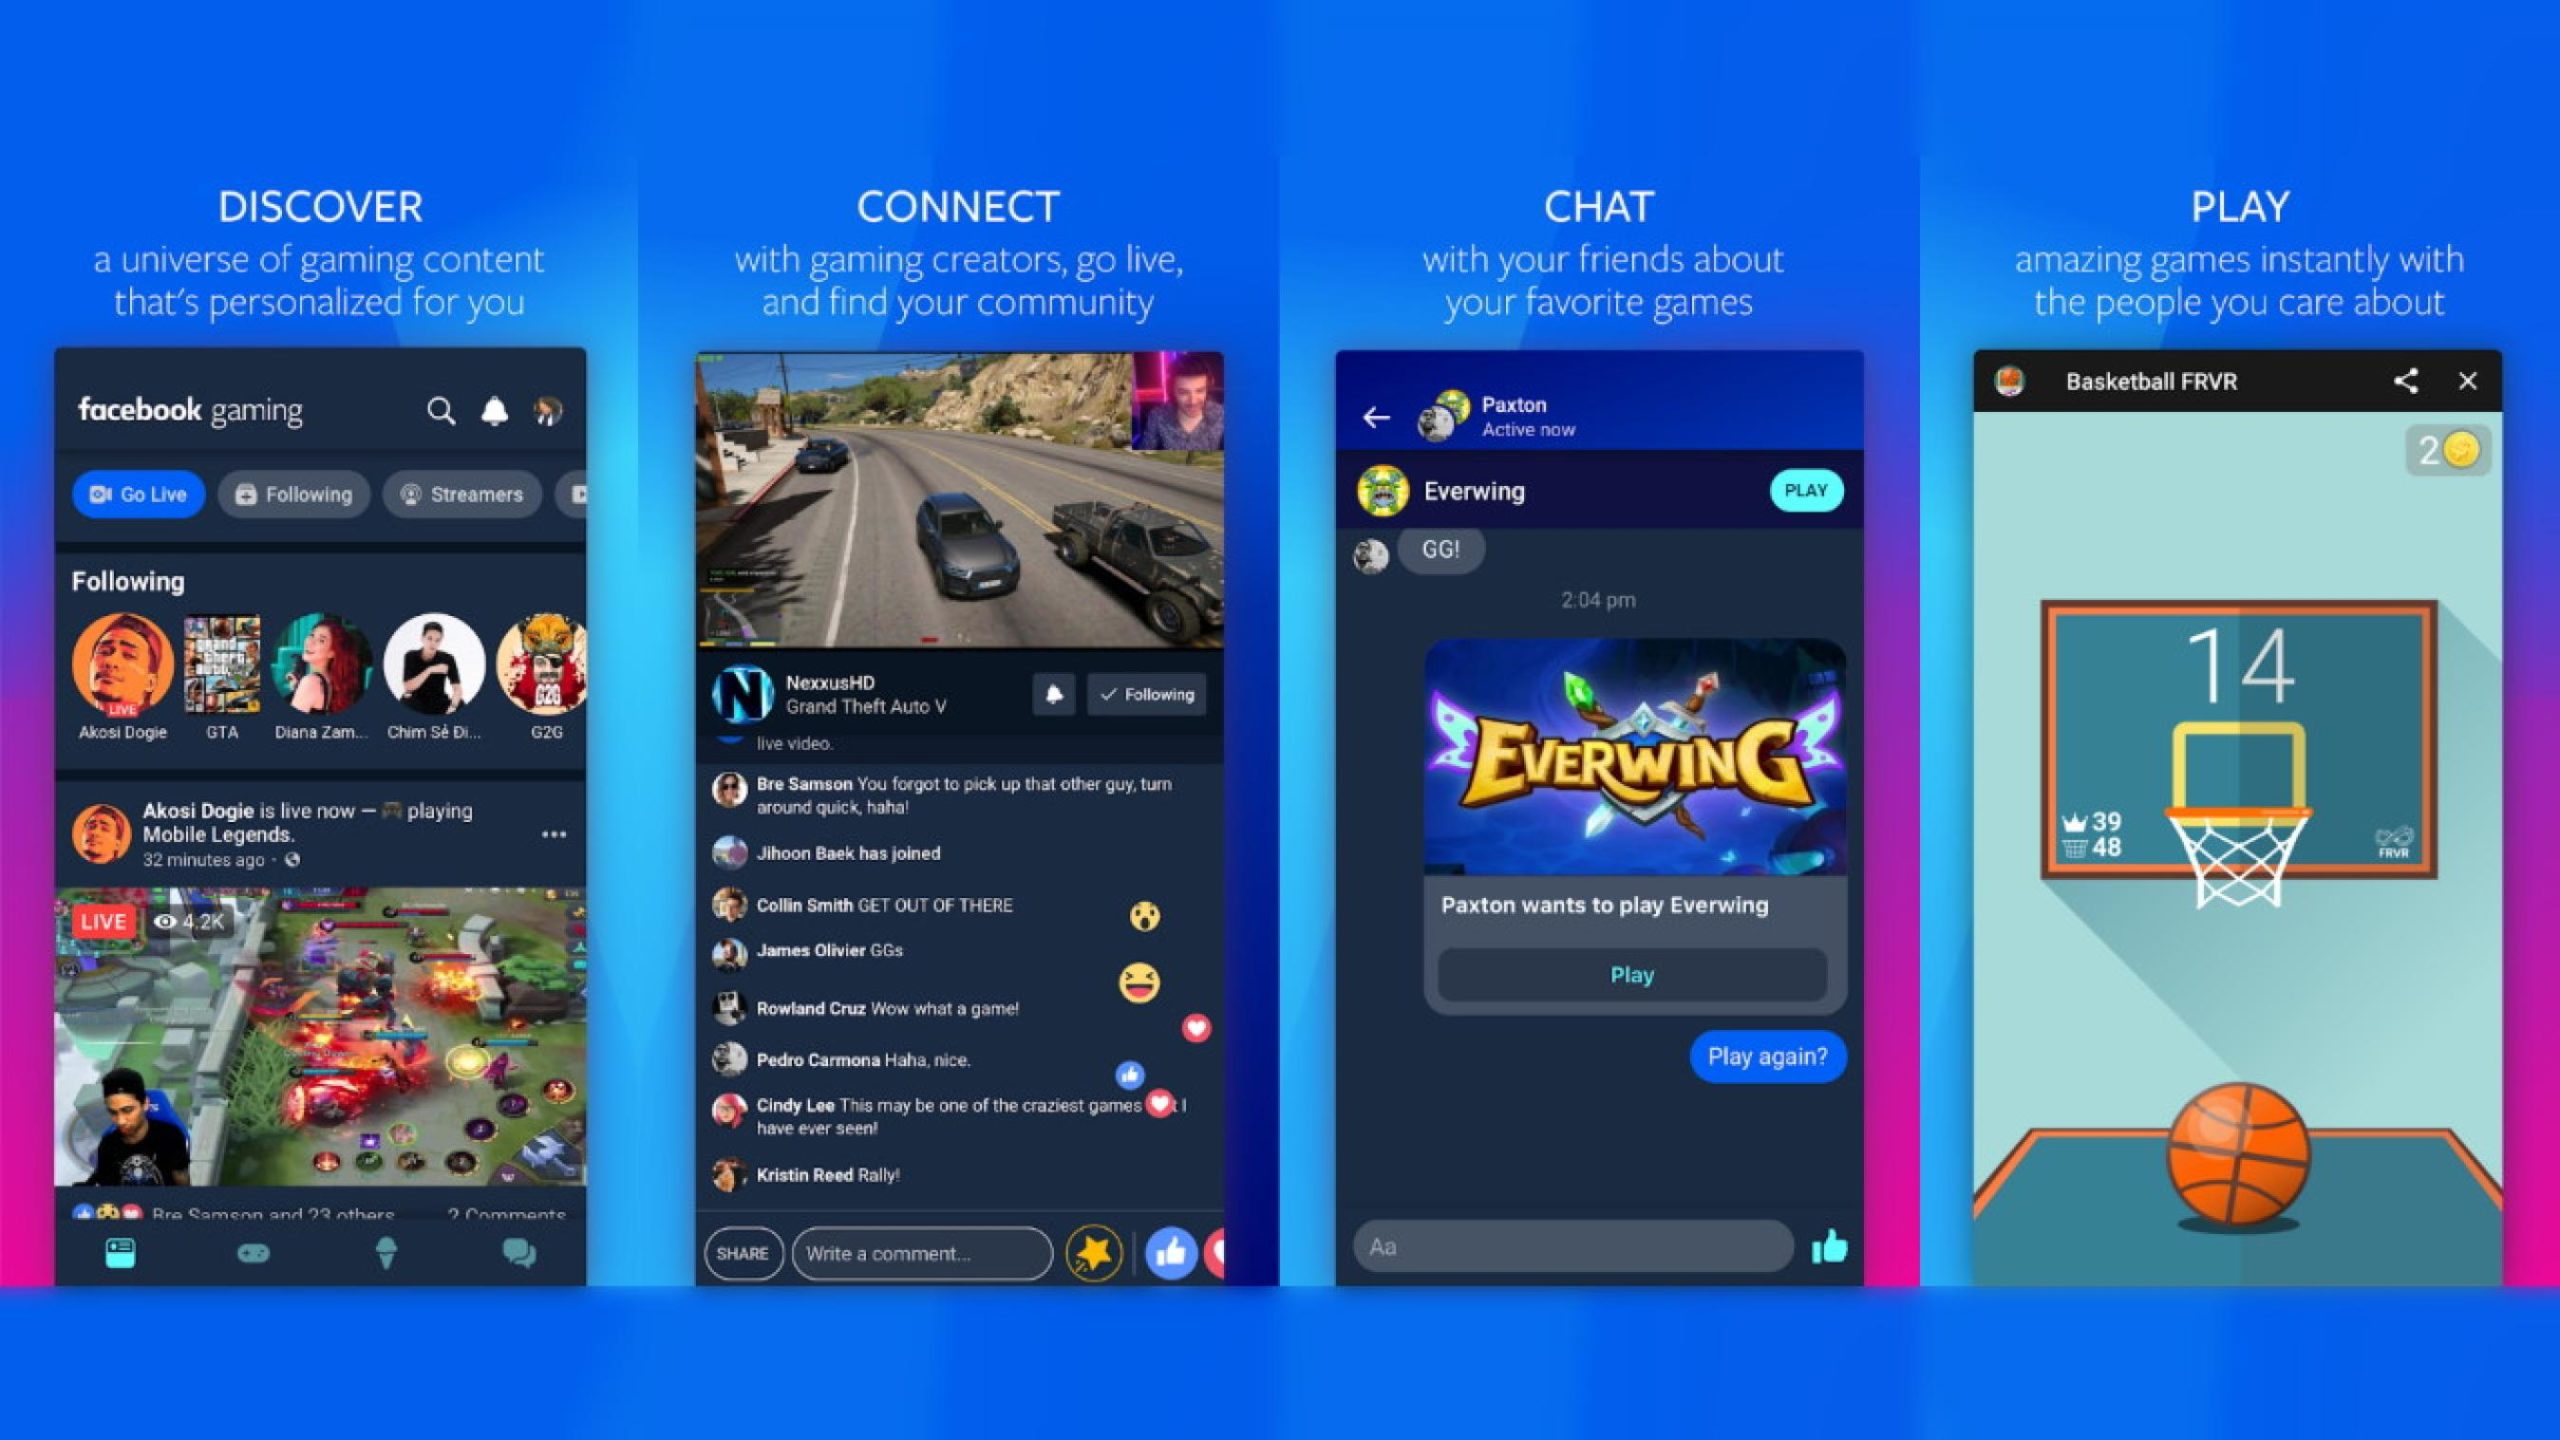 Facebook launches gaming app during the lockdown to take on Twitch and YouTube